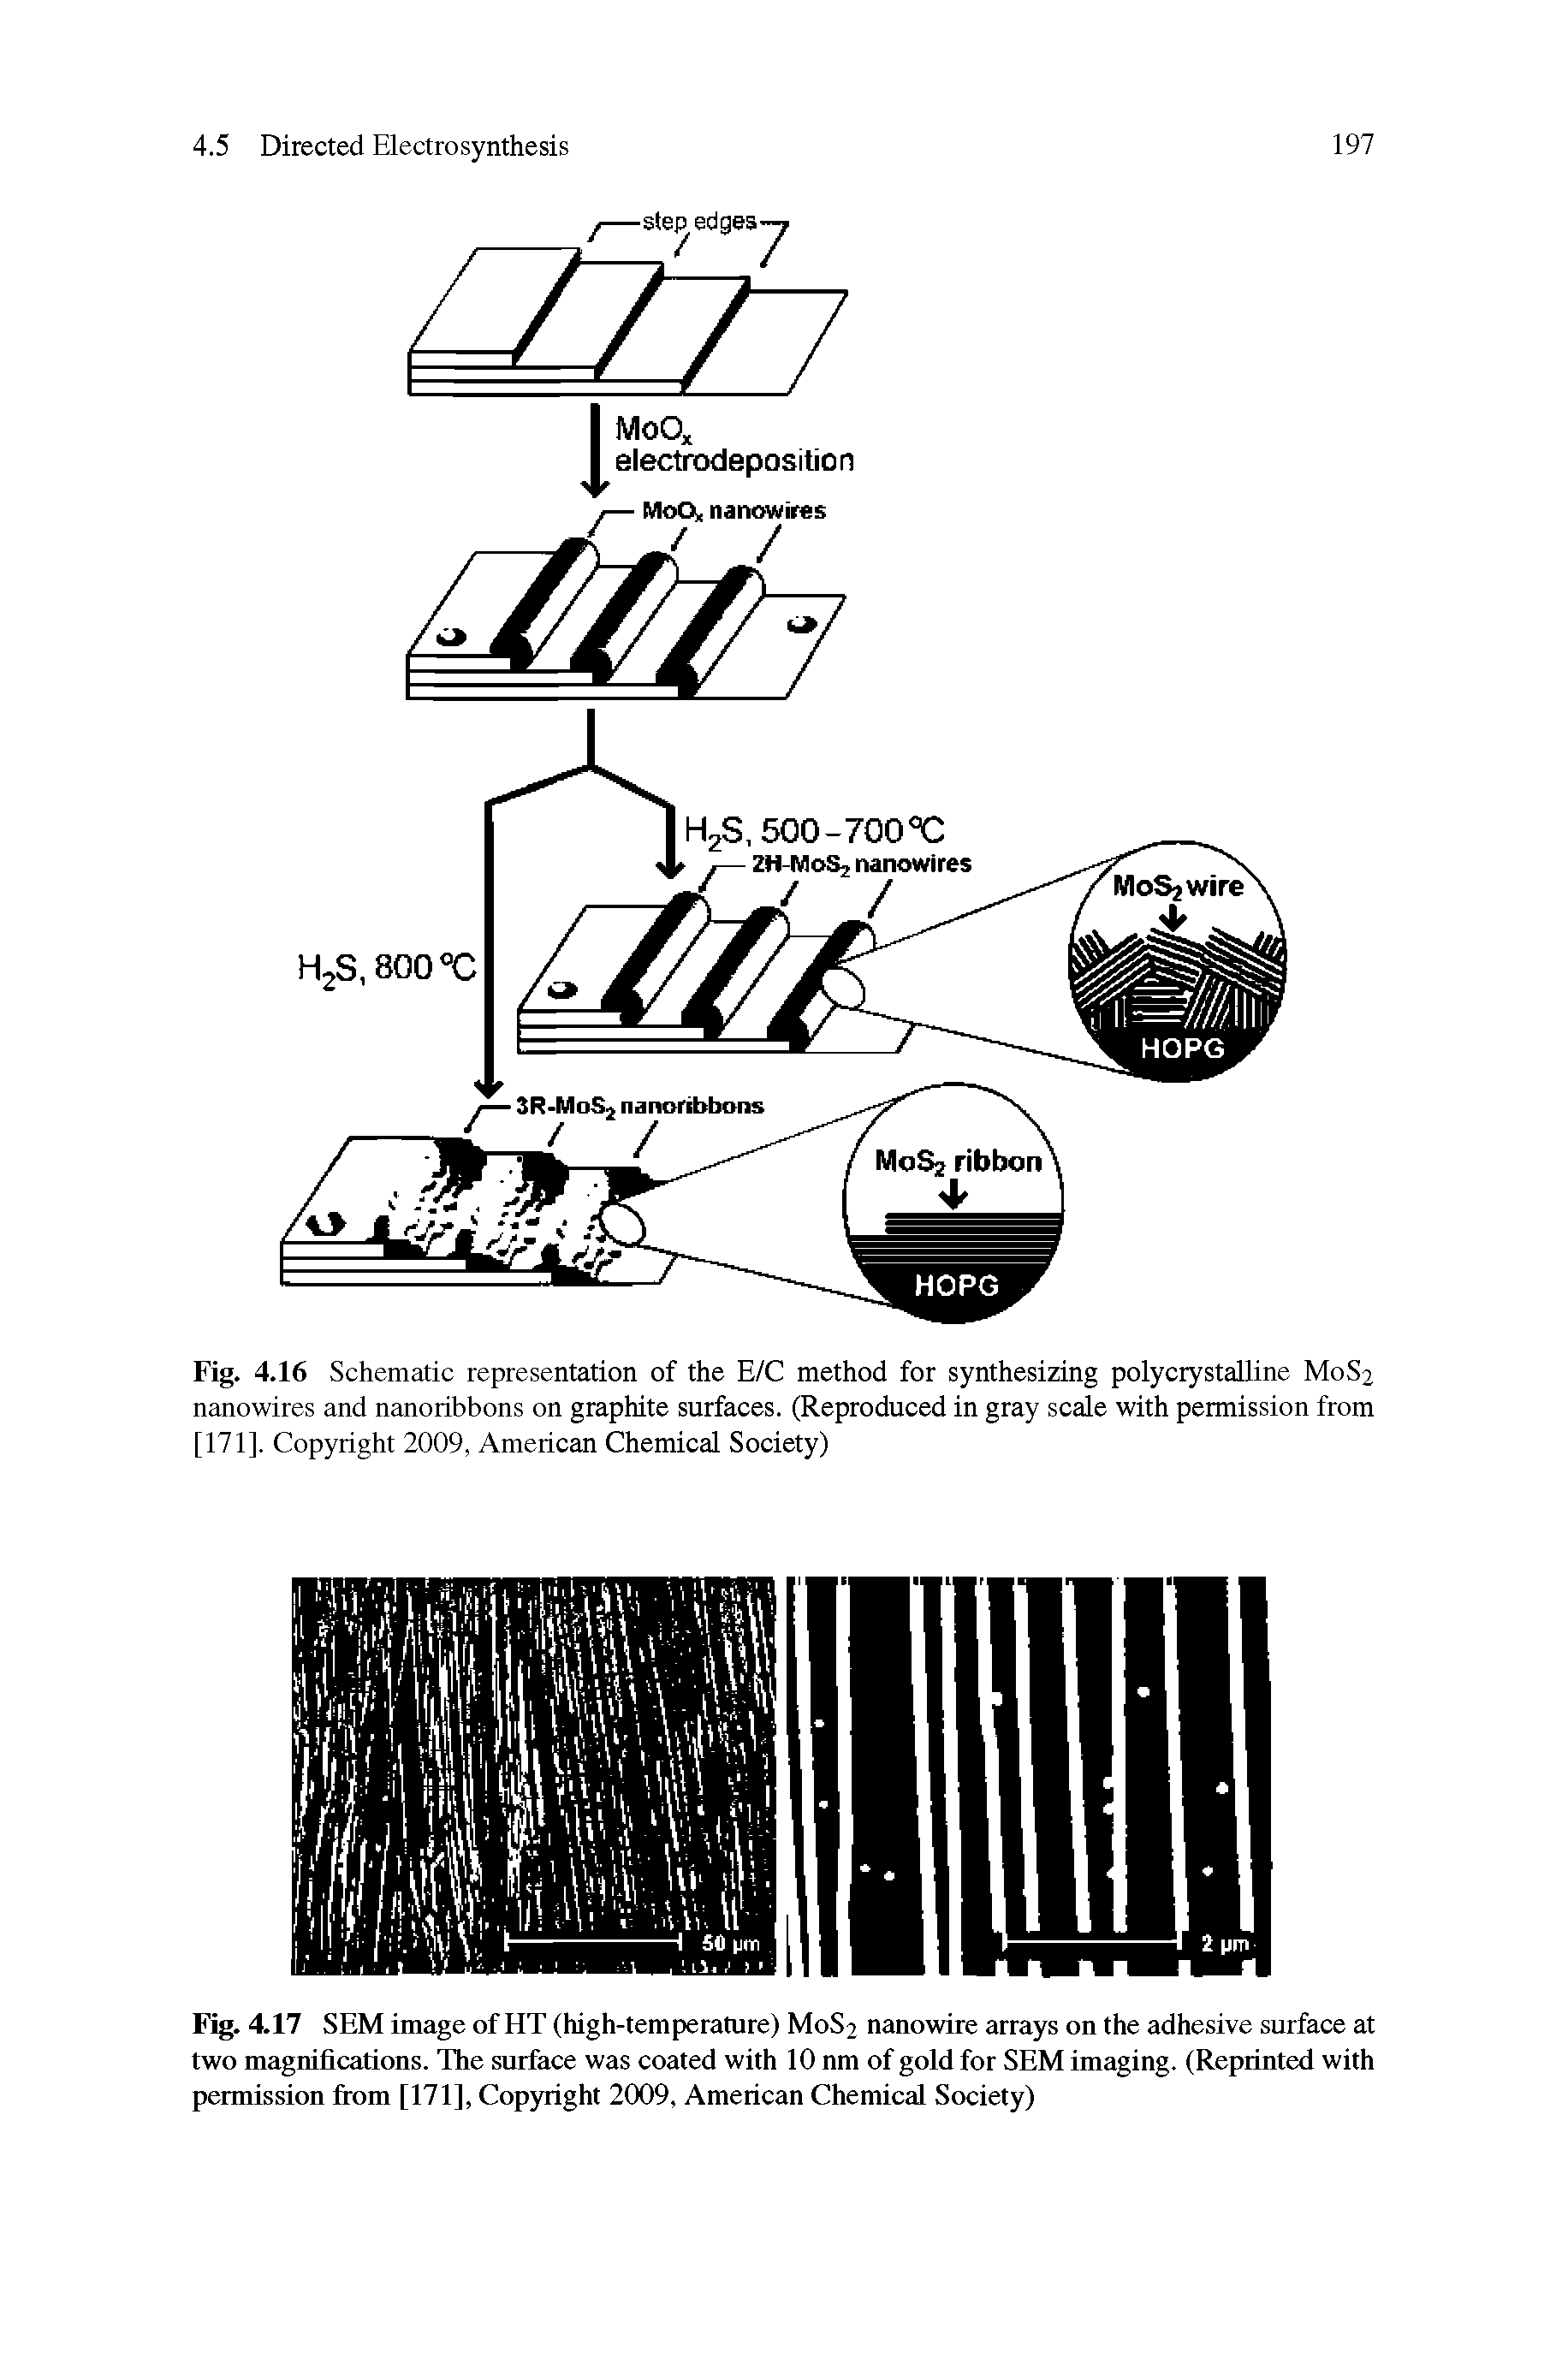 Fig. 4.16 Schematic representation of the E/C method for synthesizing polycrystalline M0S2 nanowires and nanoiibbons on graphite surfaces. (Reproduced in gray scale with permission from [171]. Copyright 2009, American Chemical Society)...